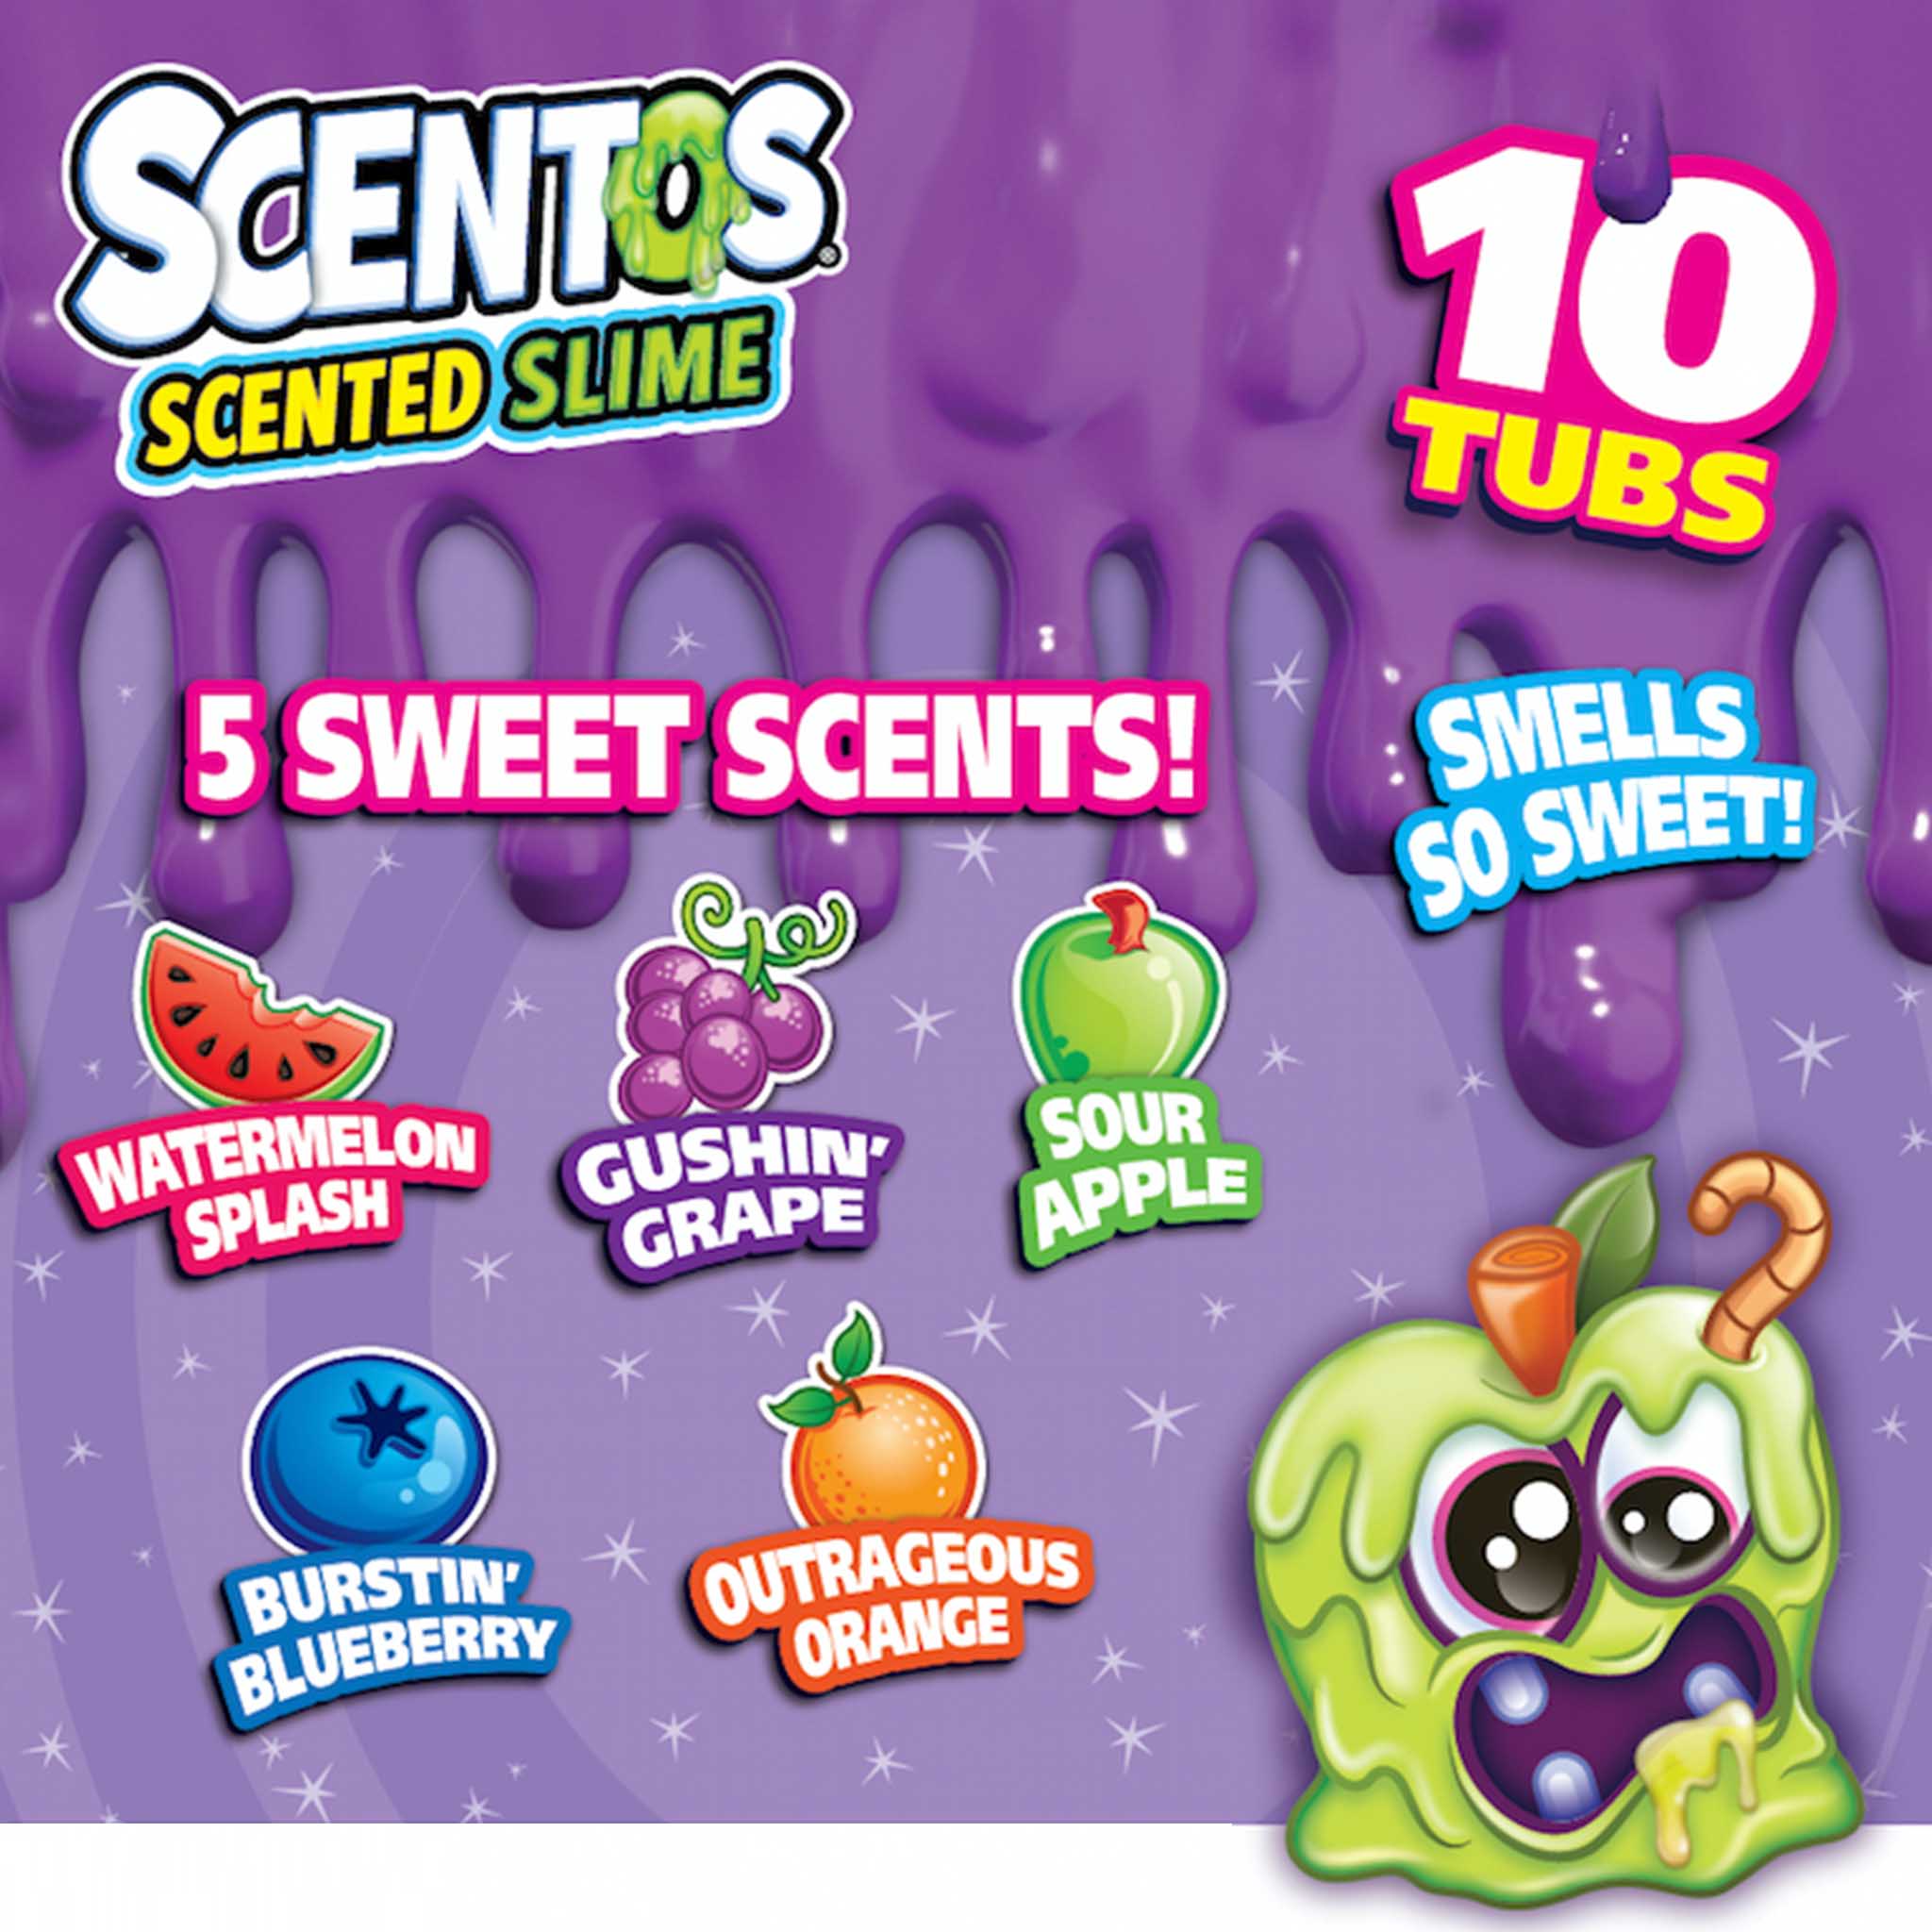 Scentos Scented Slime 10 Pack Slime Tubs